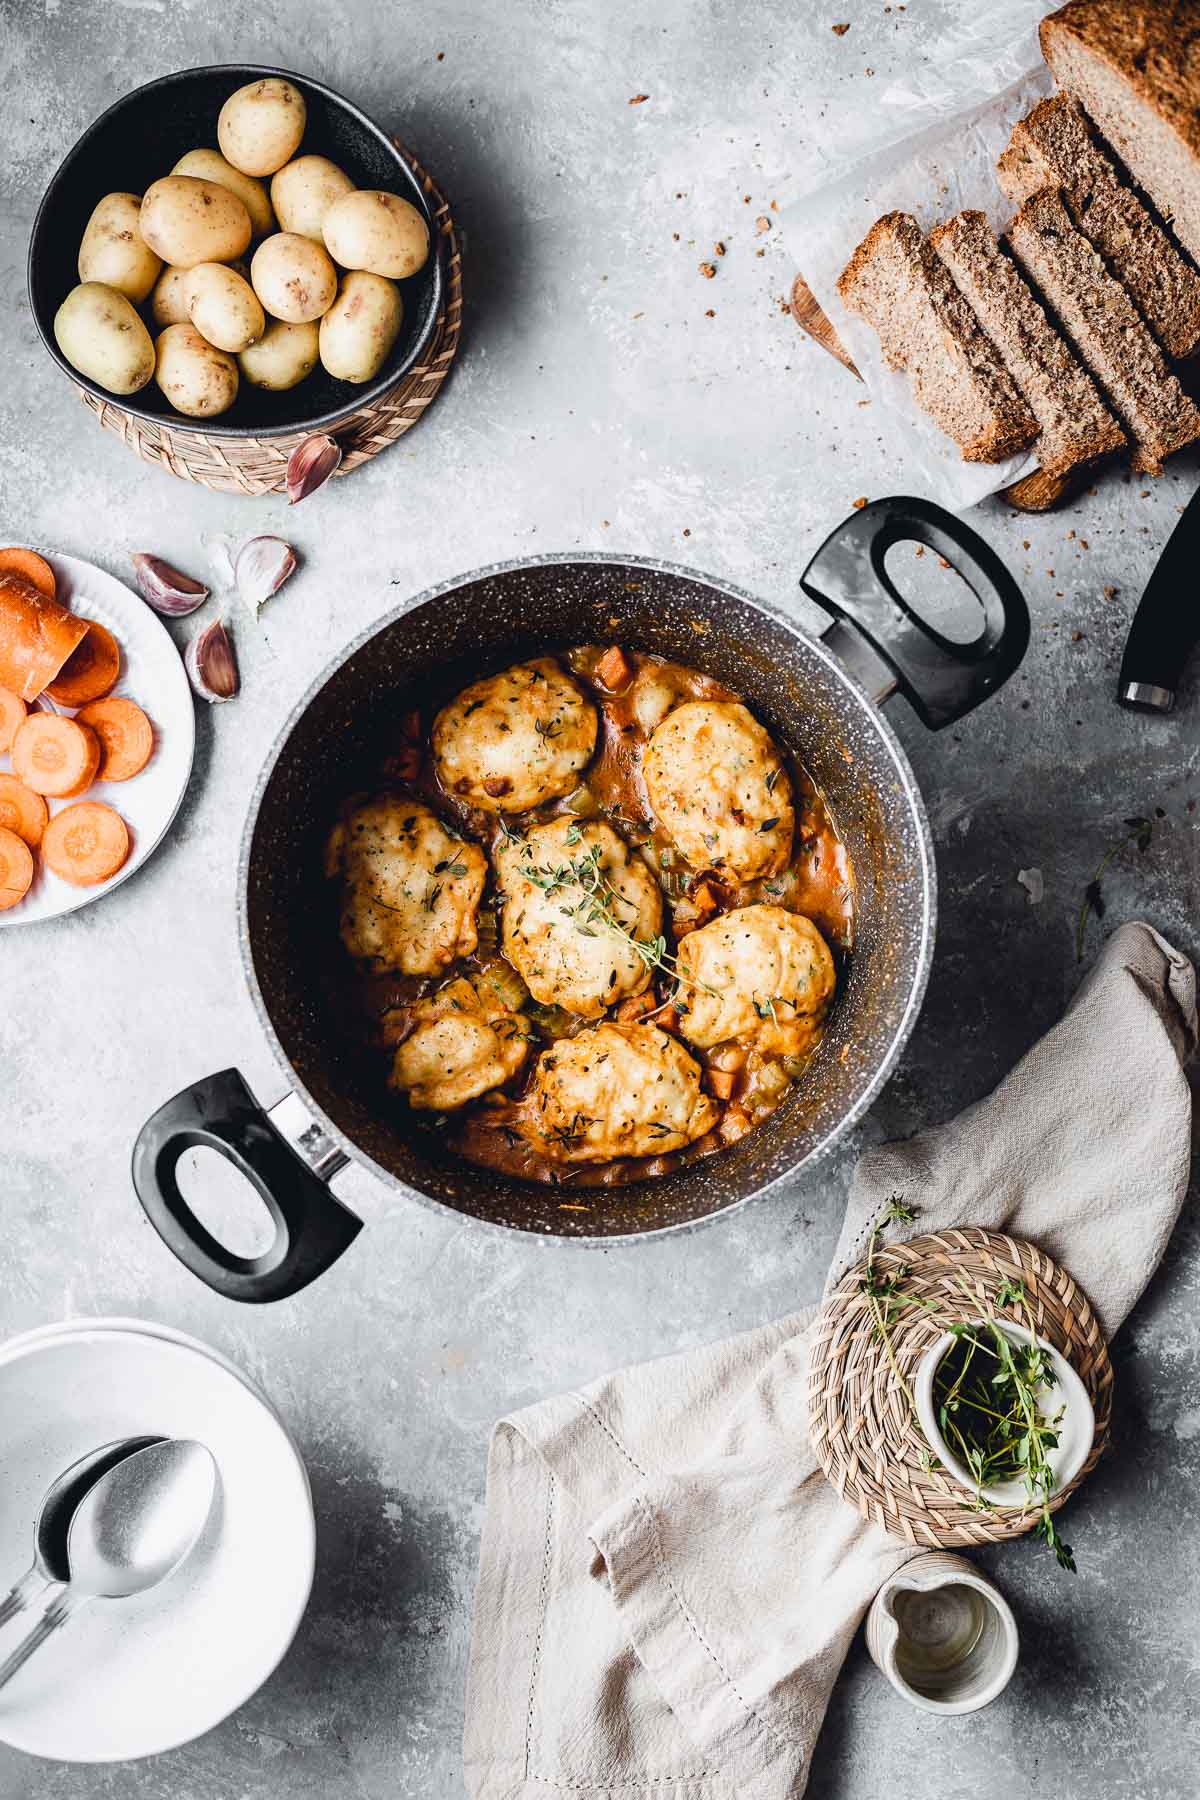 Large soup pot filled with vegan stew and topped with dumplings.